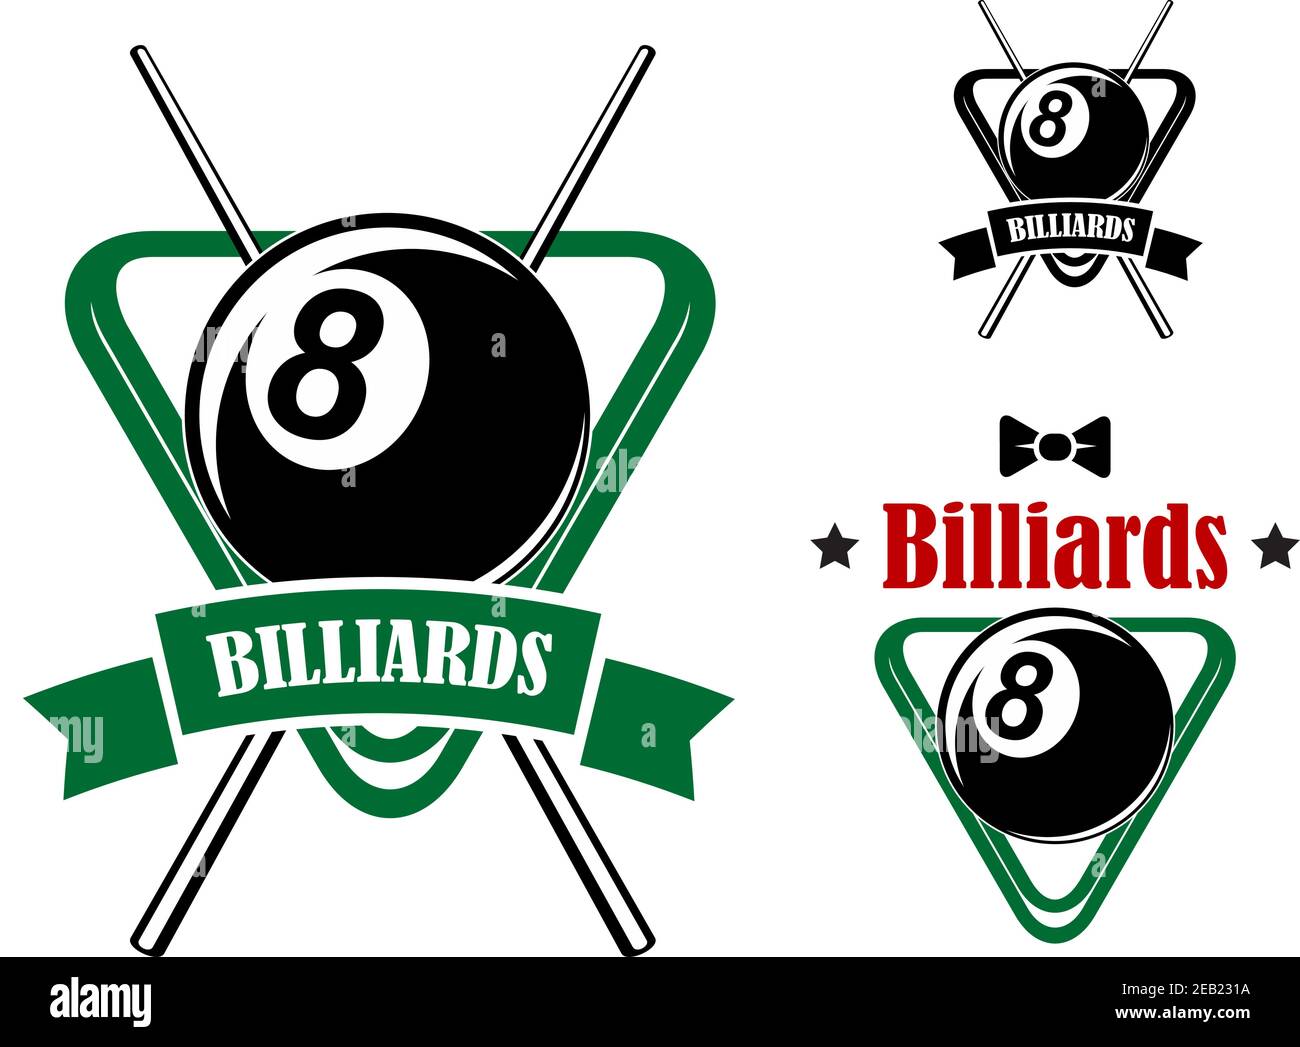 Billiards or pool emblems showing balls in the triangle racks with stars and bow tie and second variant with crossed cues and ribbon banner suitable f Stock Vector